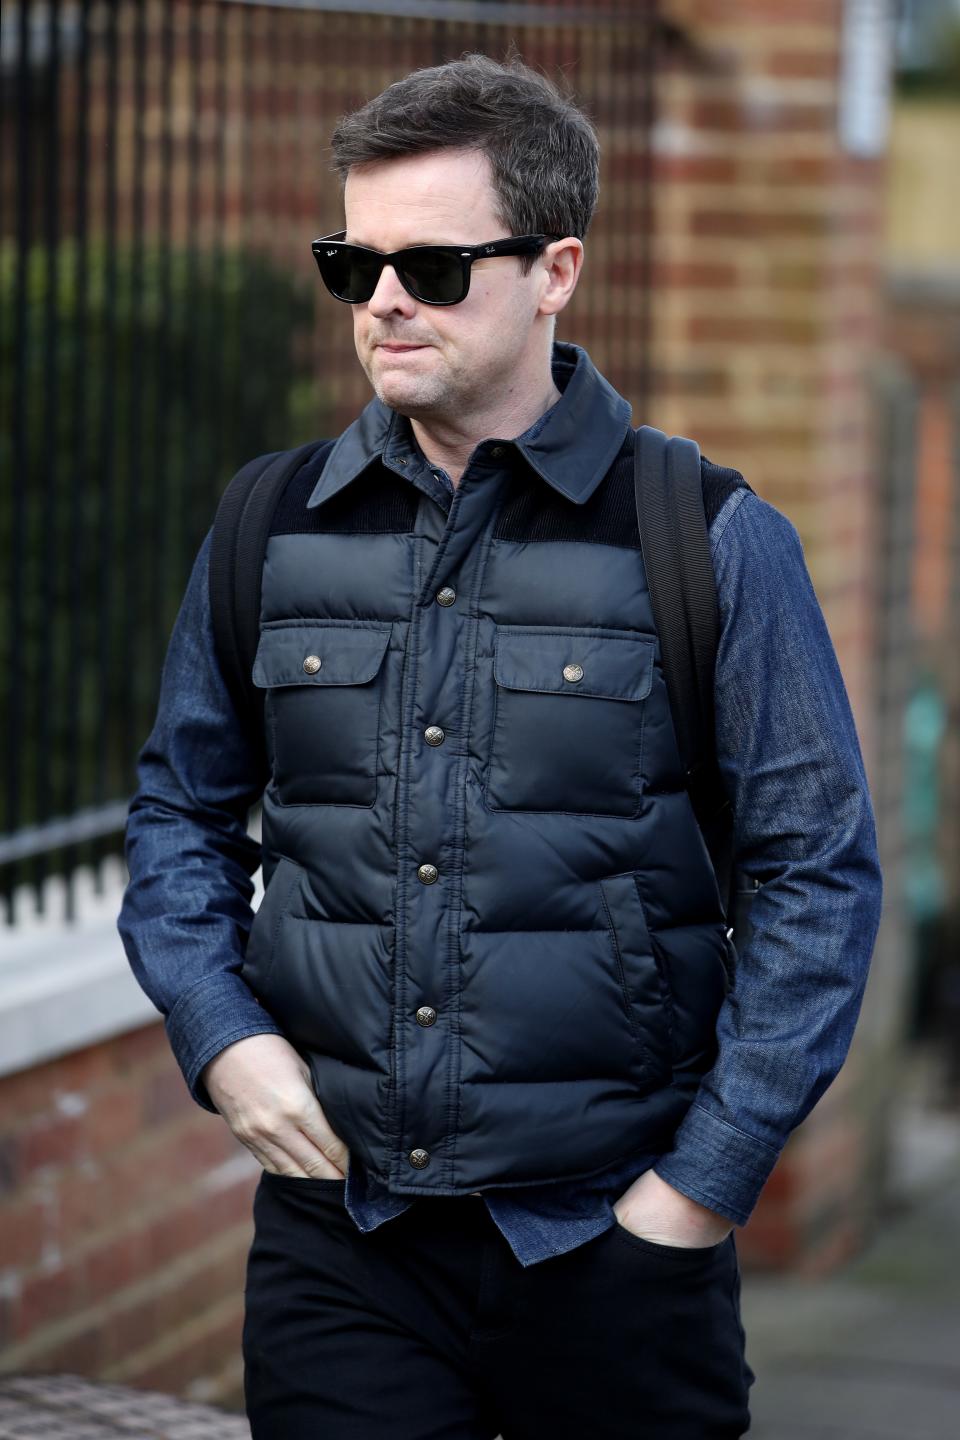 Dec was seen out and about again today, vowing to go it alone on Saturday Night Takeaway. (FlyNet)